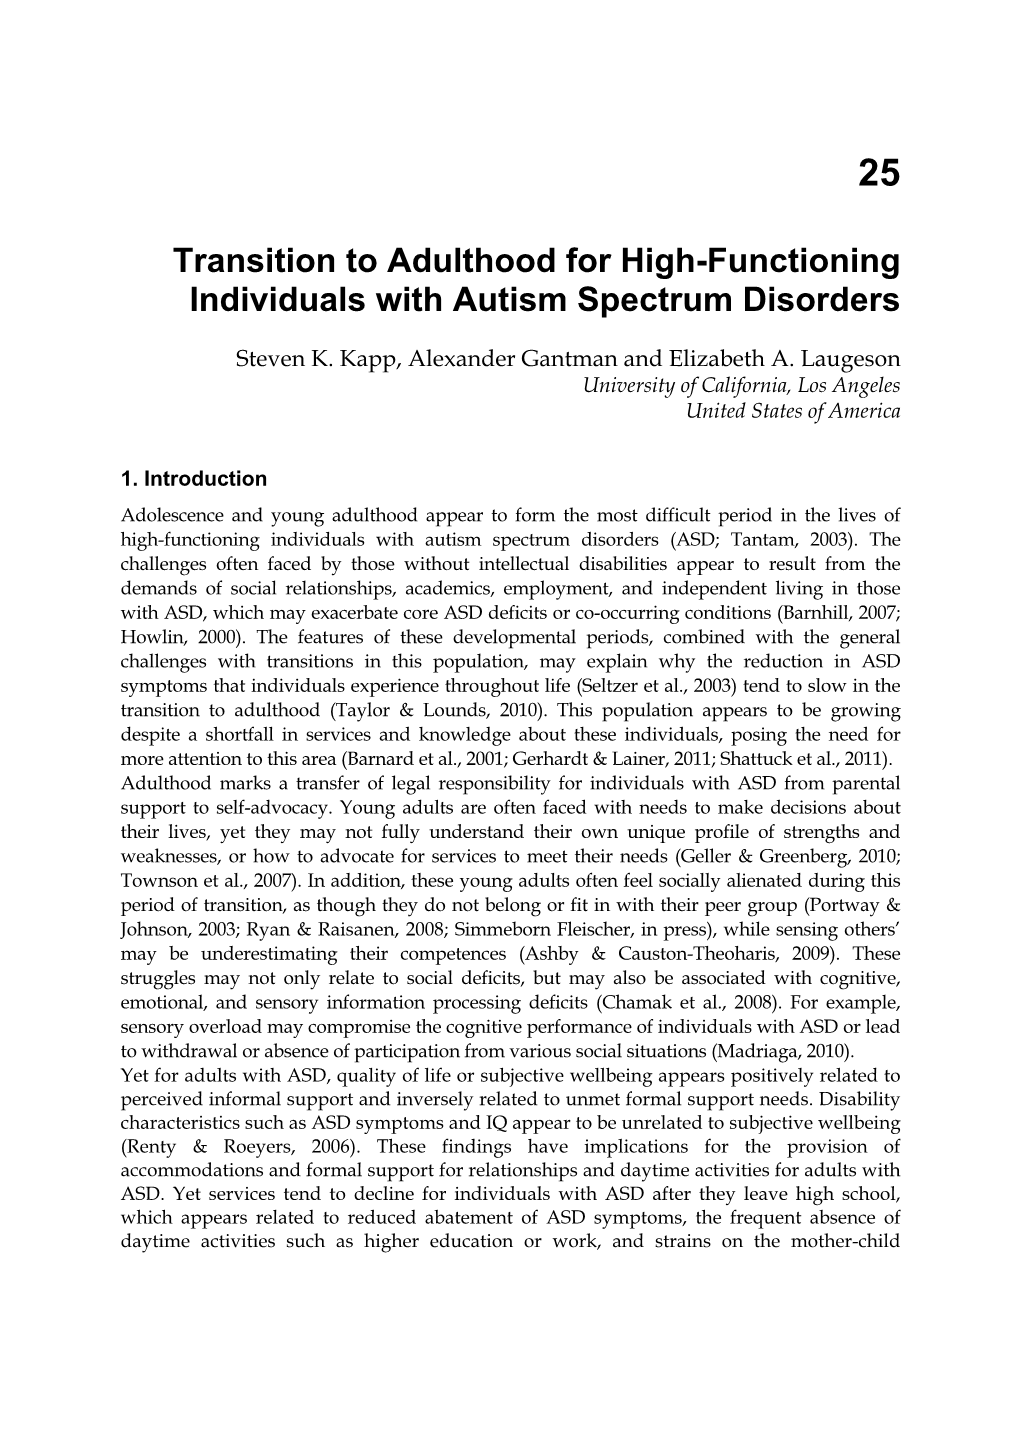 Transition to Adulthood for High-Functioning Individuals with Autism Spectrum Disorders